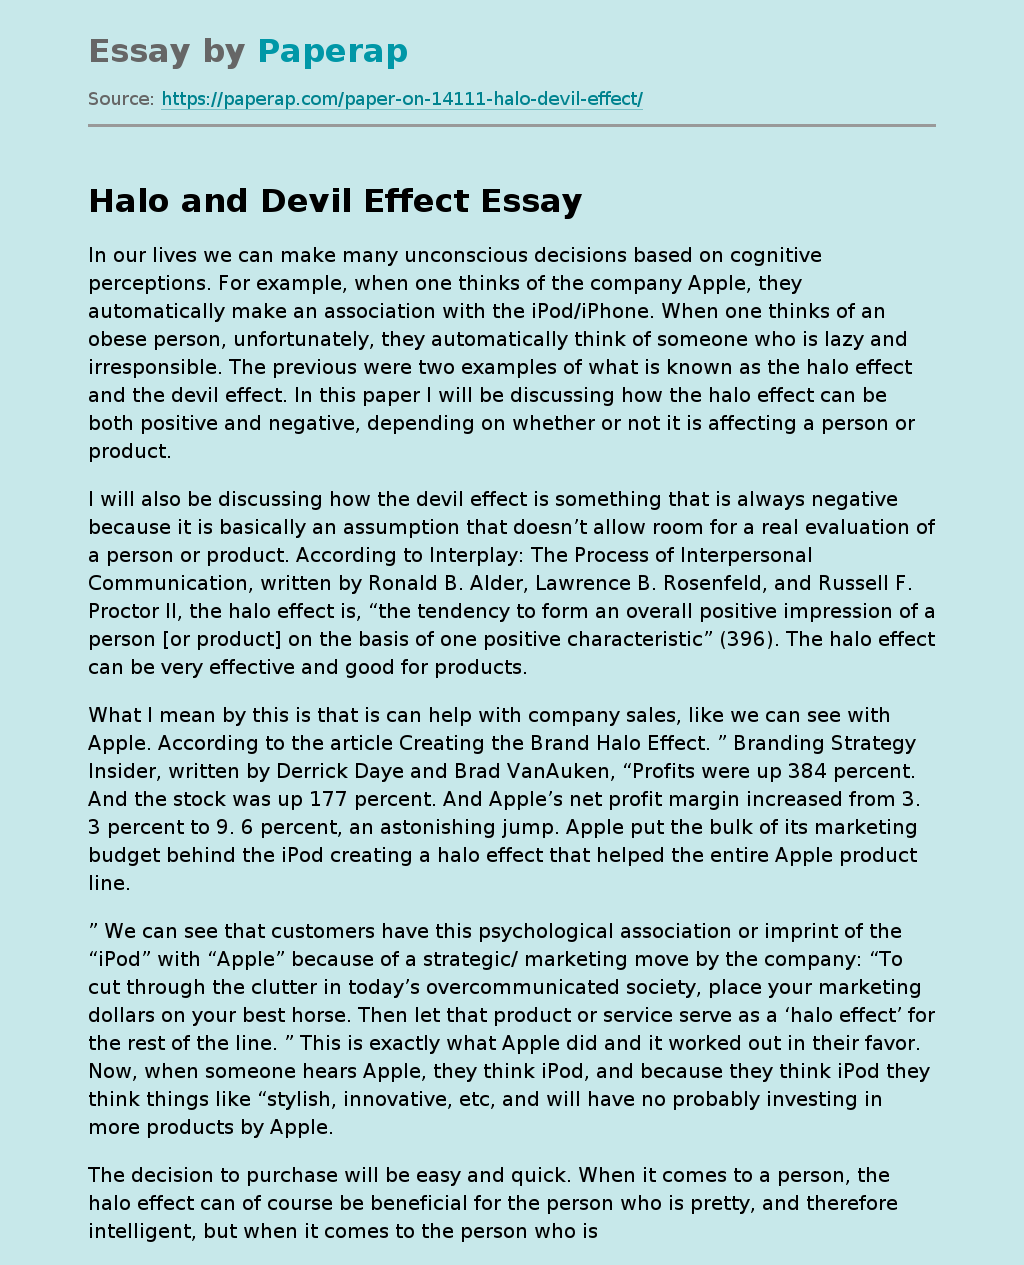 Halo and Devil Effect